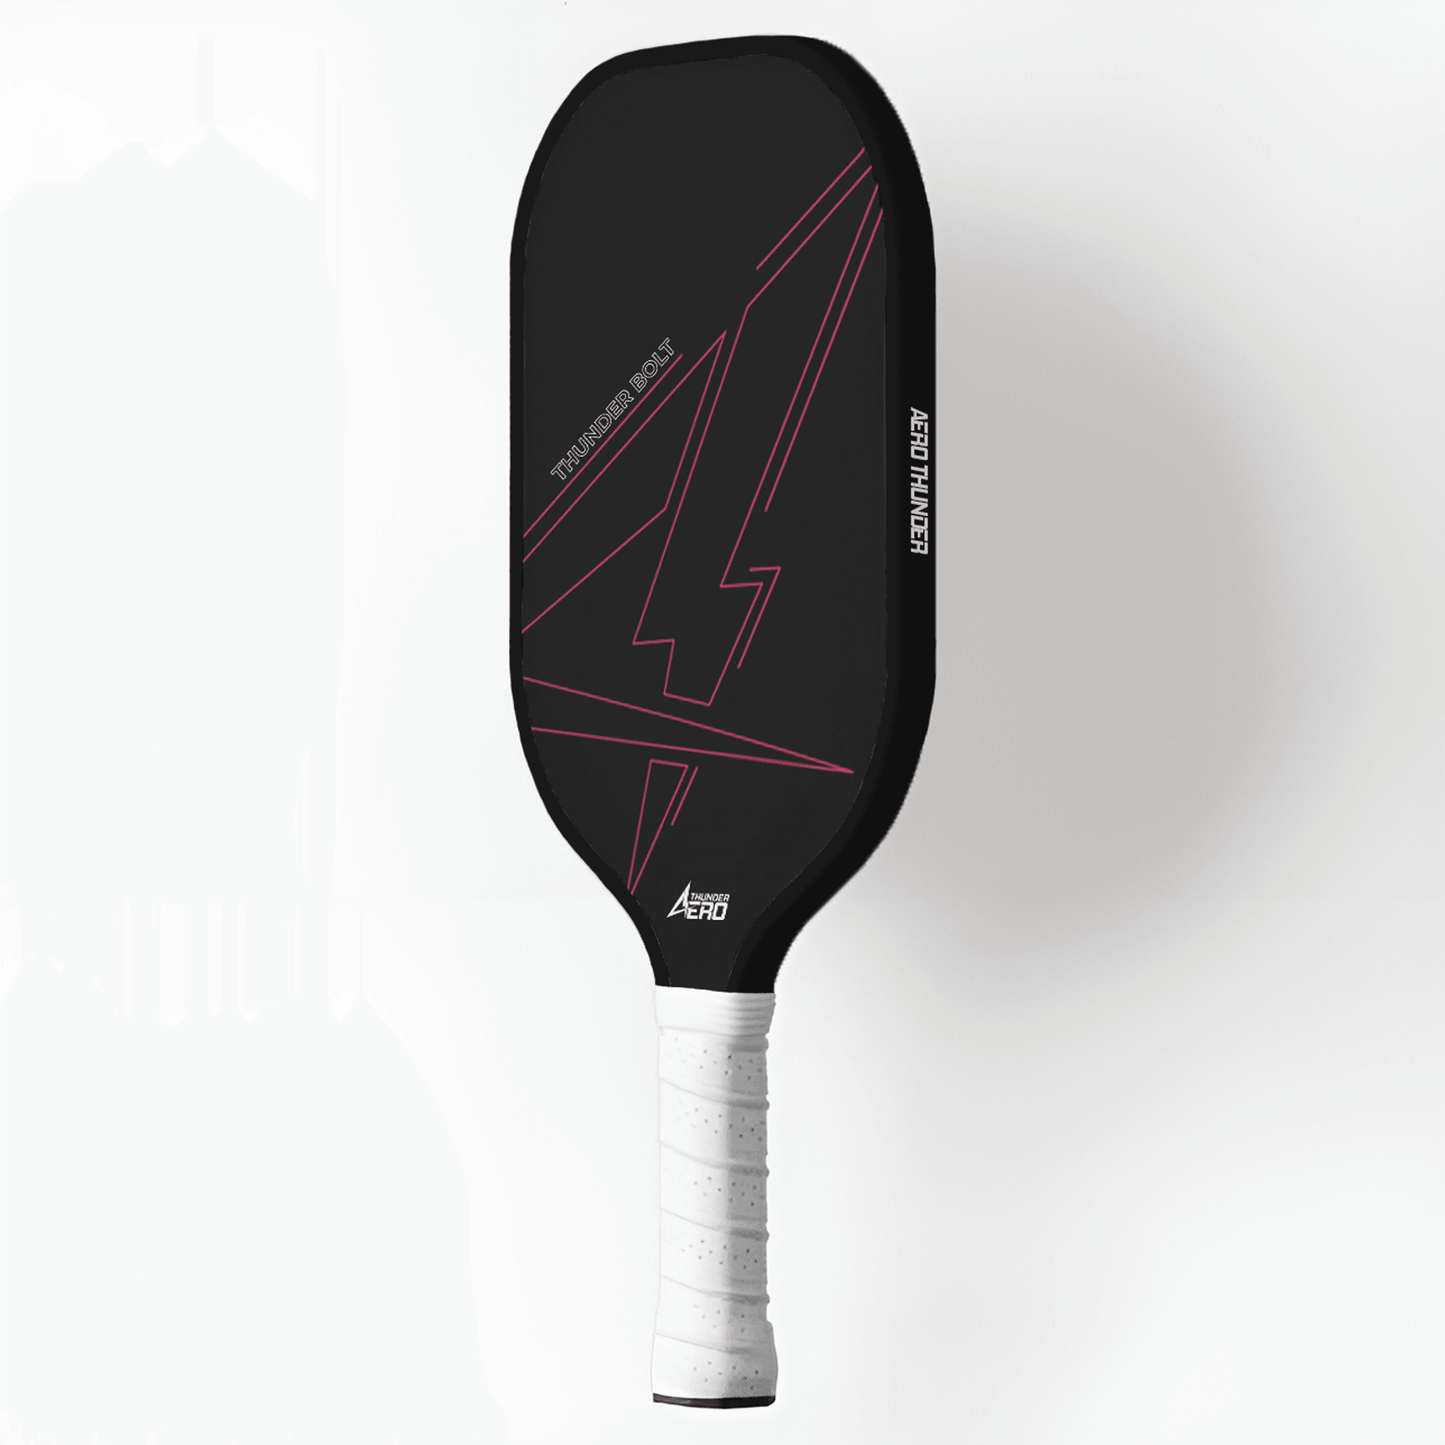 Epic drive Edition Best Professional Pickleball Paddle Brand AT-2000 Pink - Aero Thunder